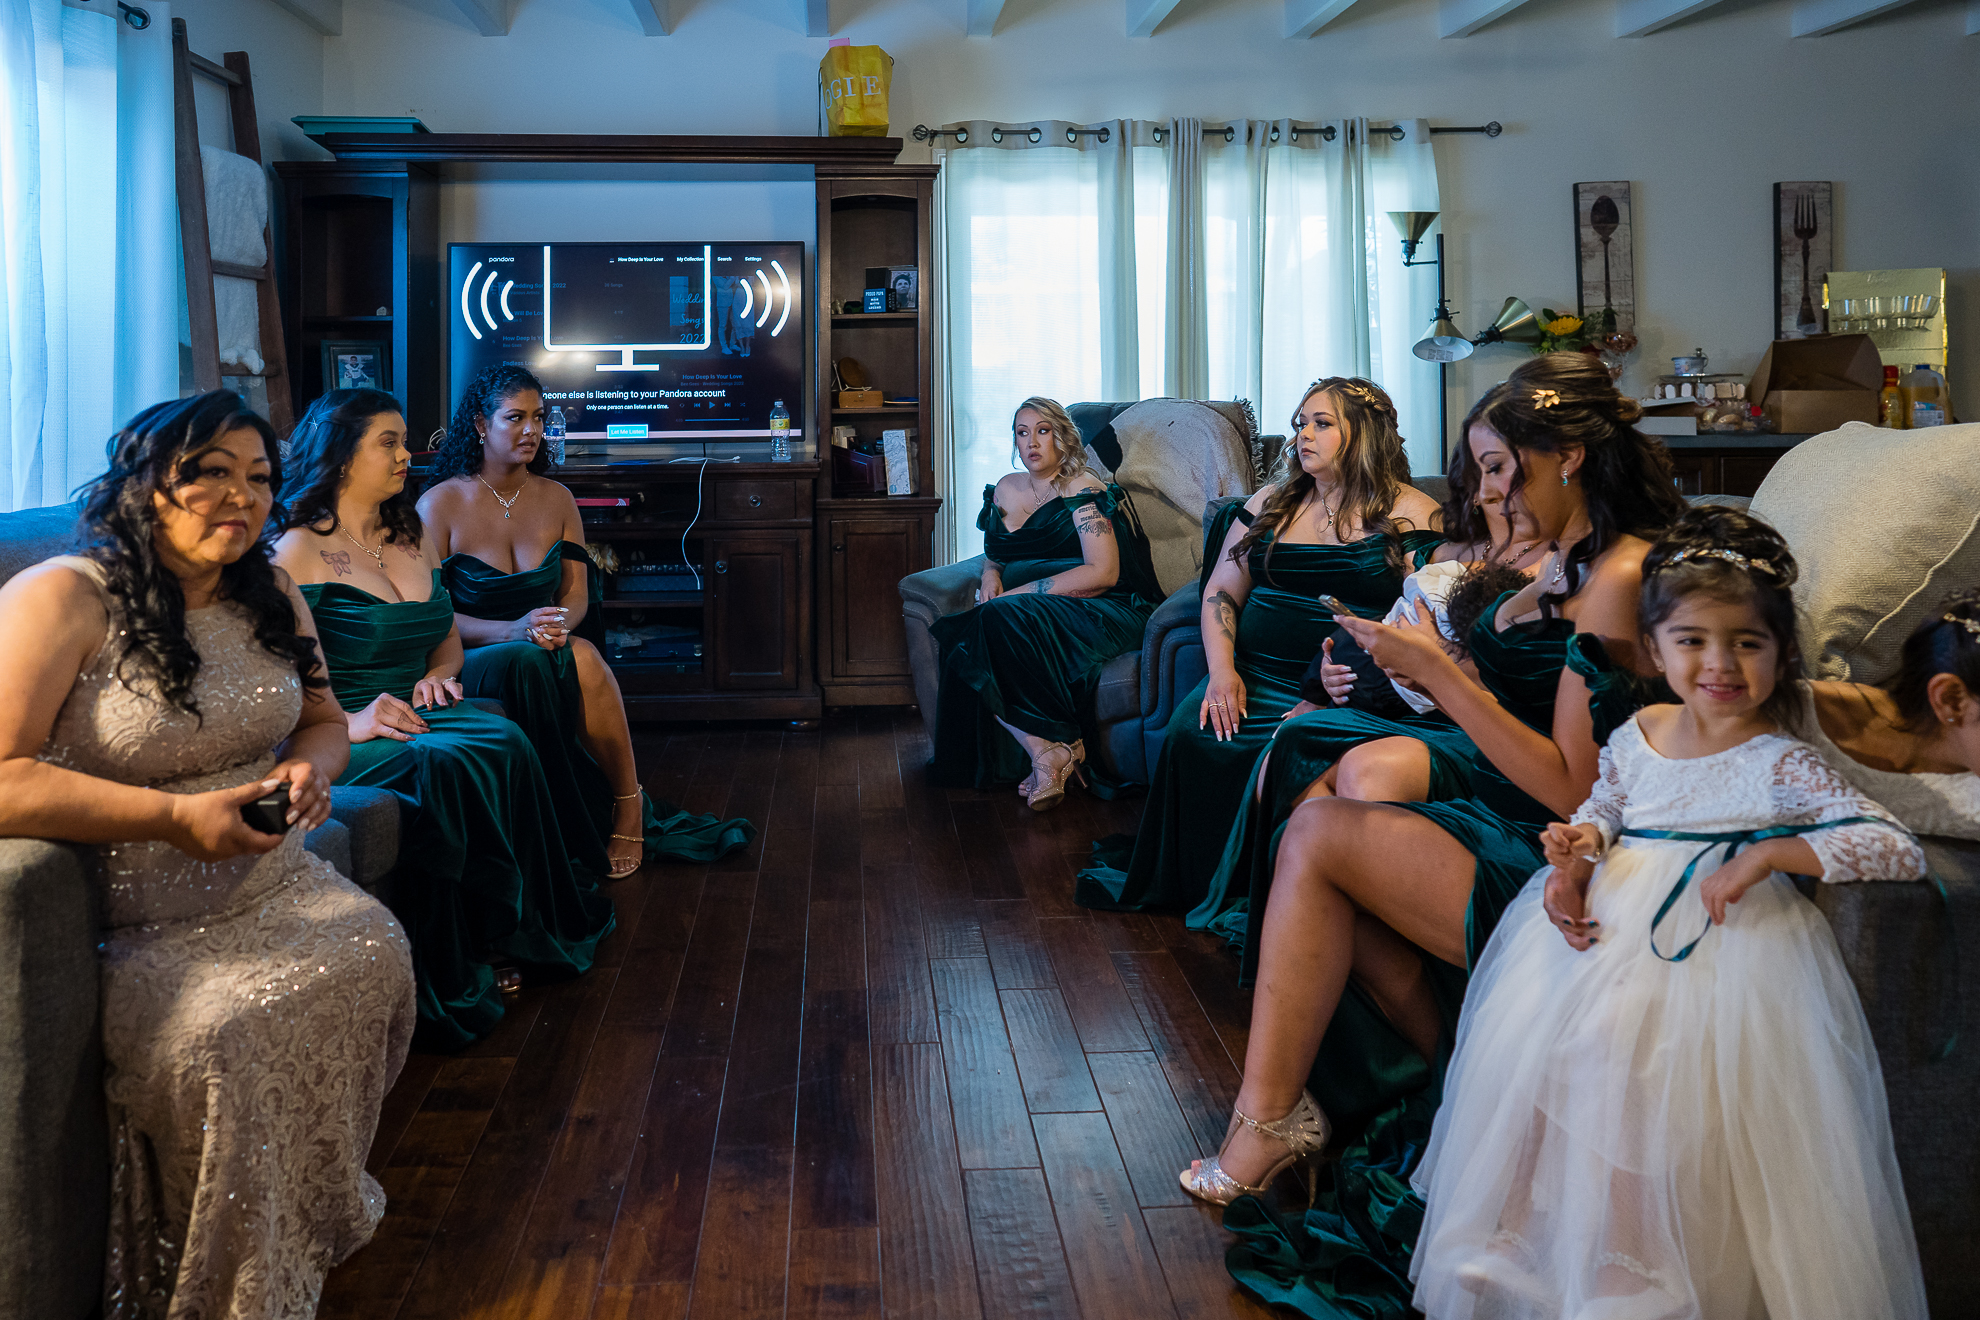 ThomasKim_photography Bridesmaids relaxing in a living room watching tv.